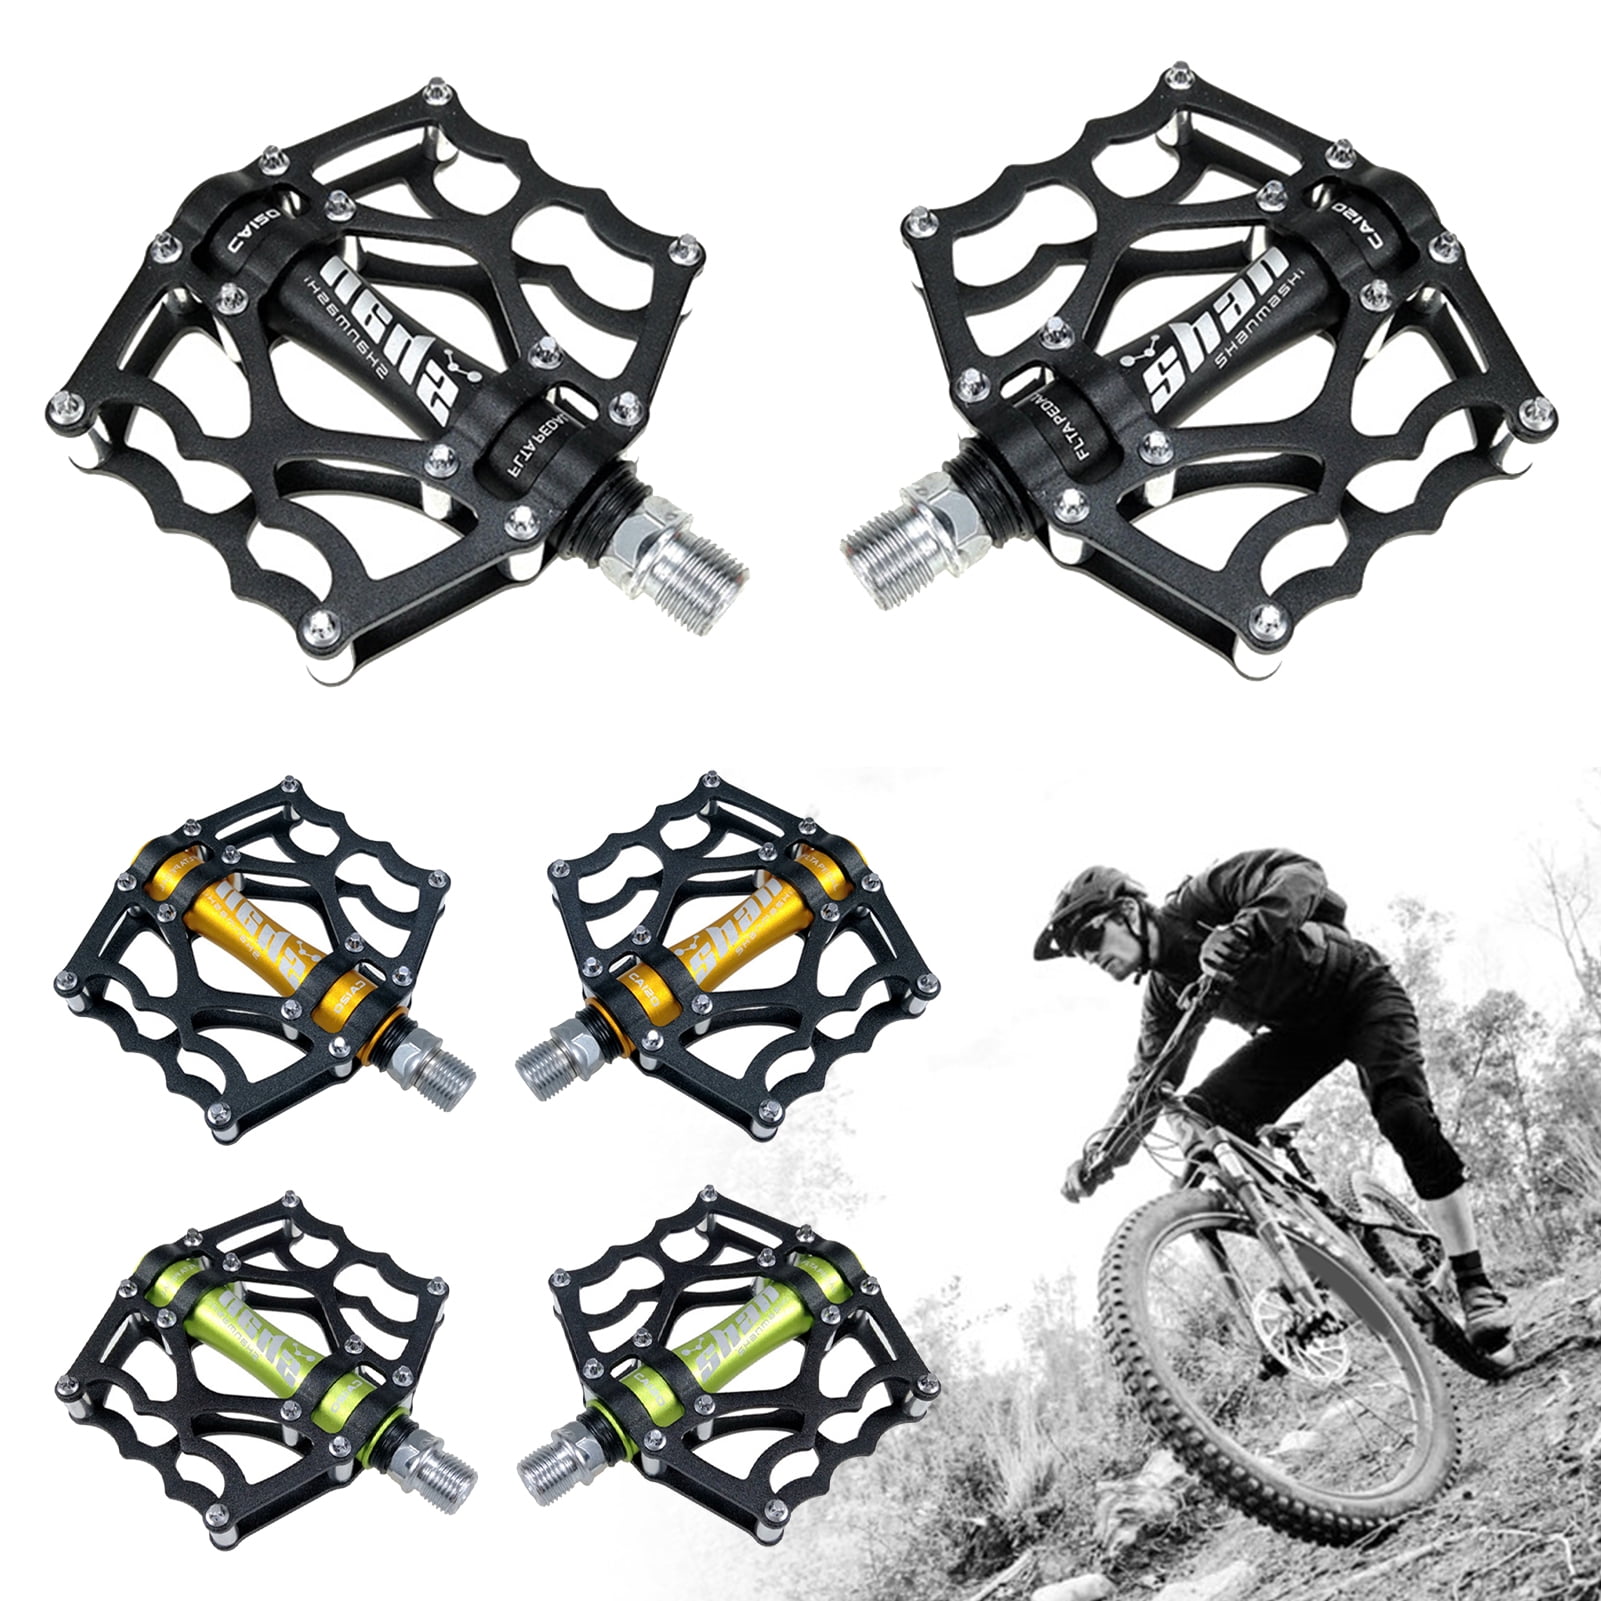 1 Pair Of Bicycle Clipless Pedal Platform Adapters For MTB Mountain Road Bikes